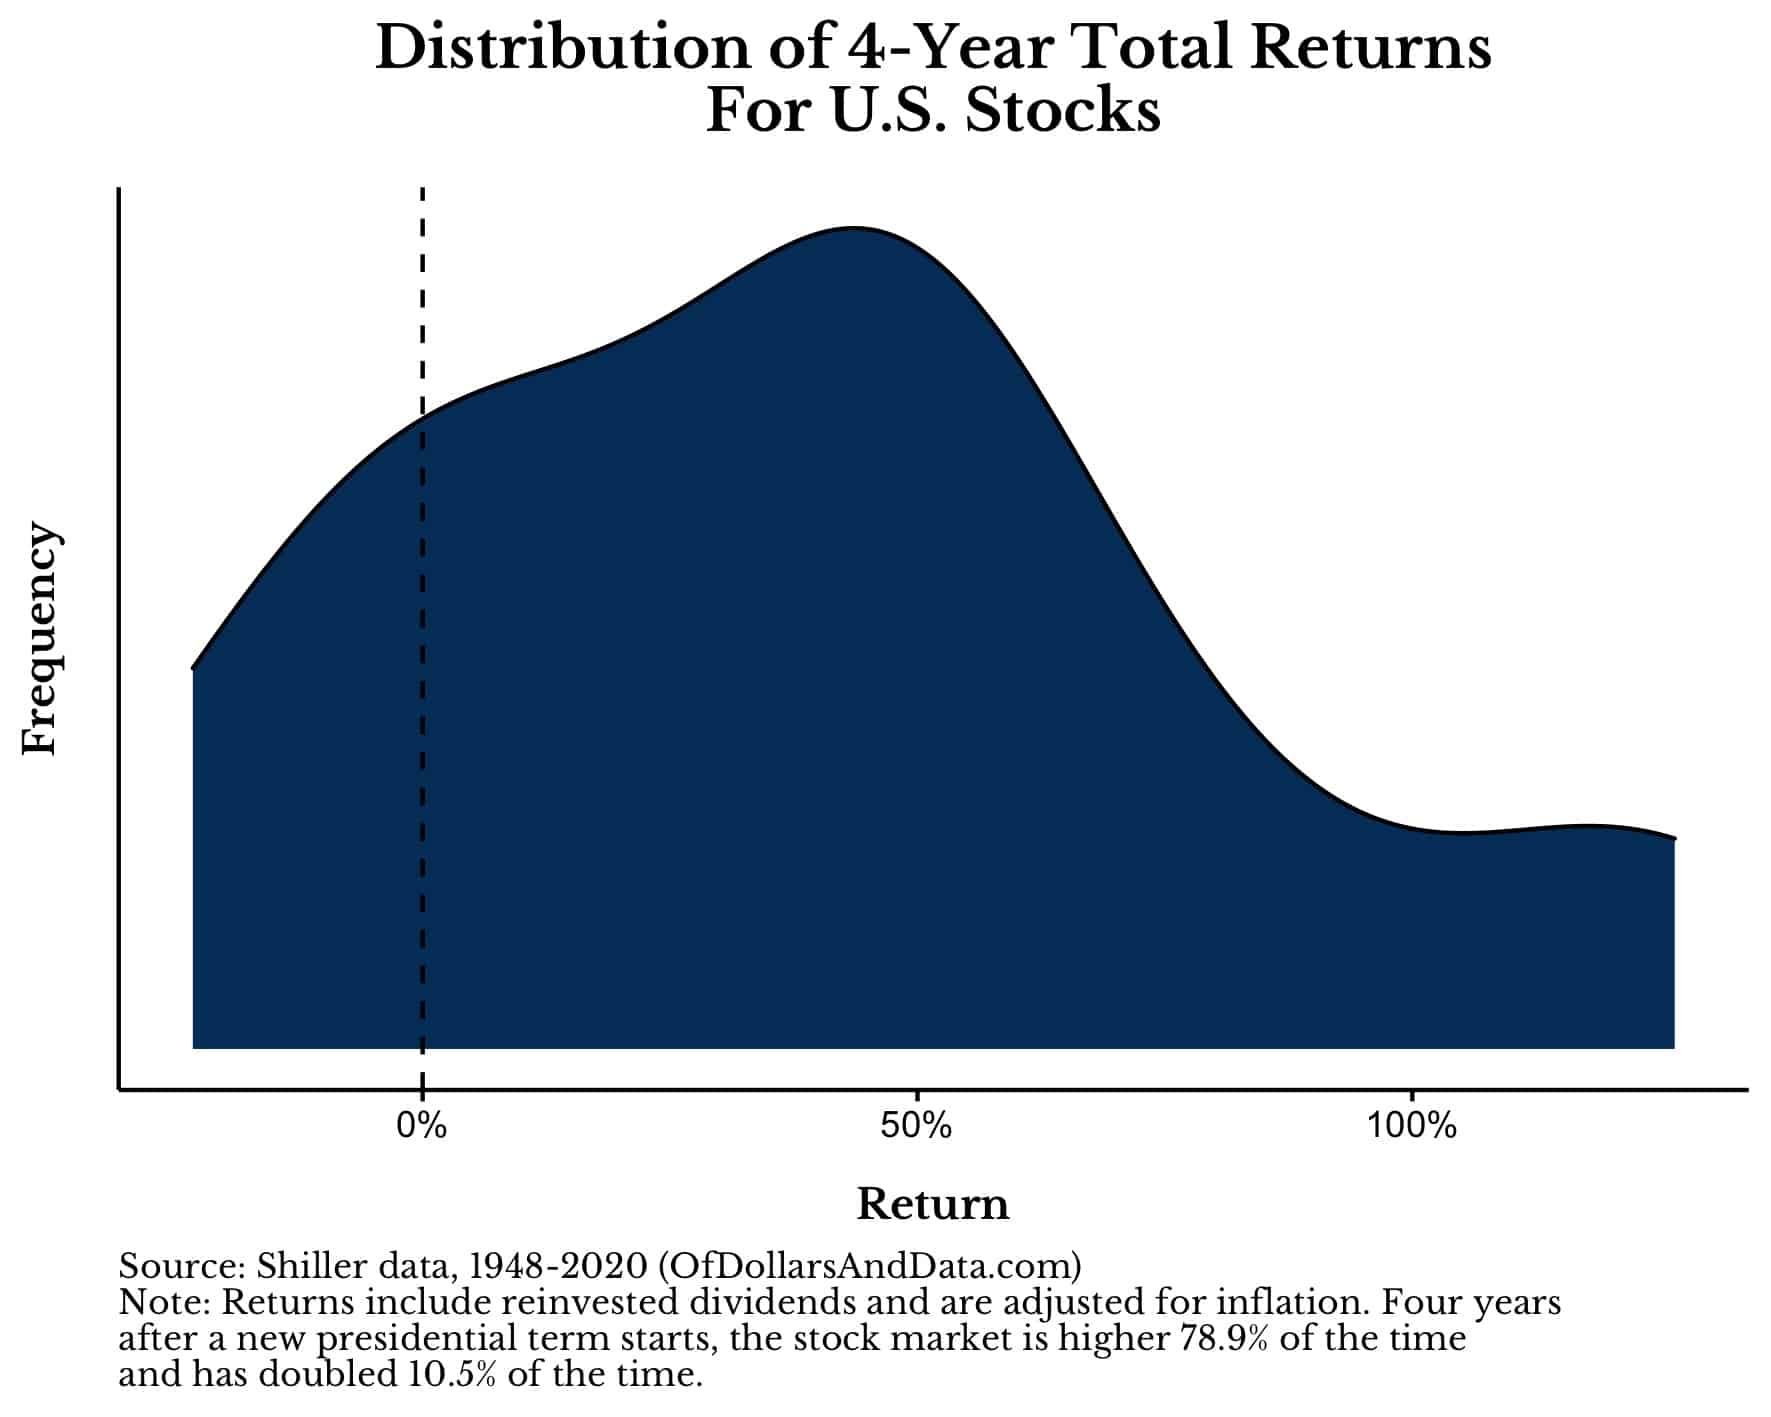 Chart showing distribution of 4-year total returns for US stocks since 1948.